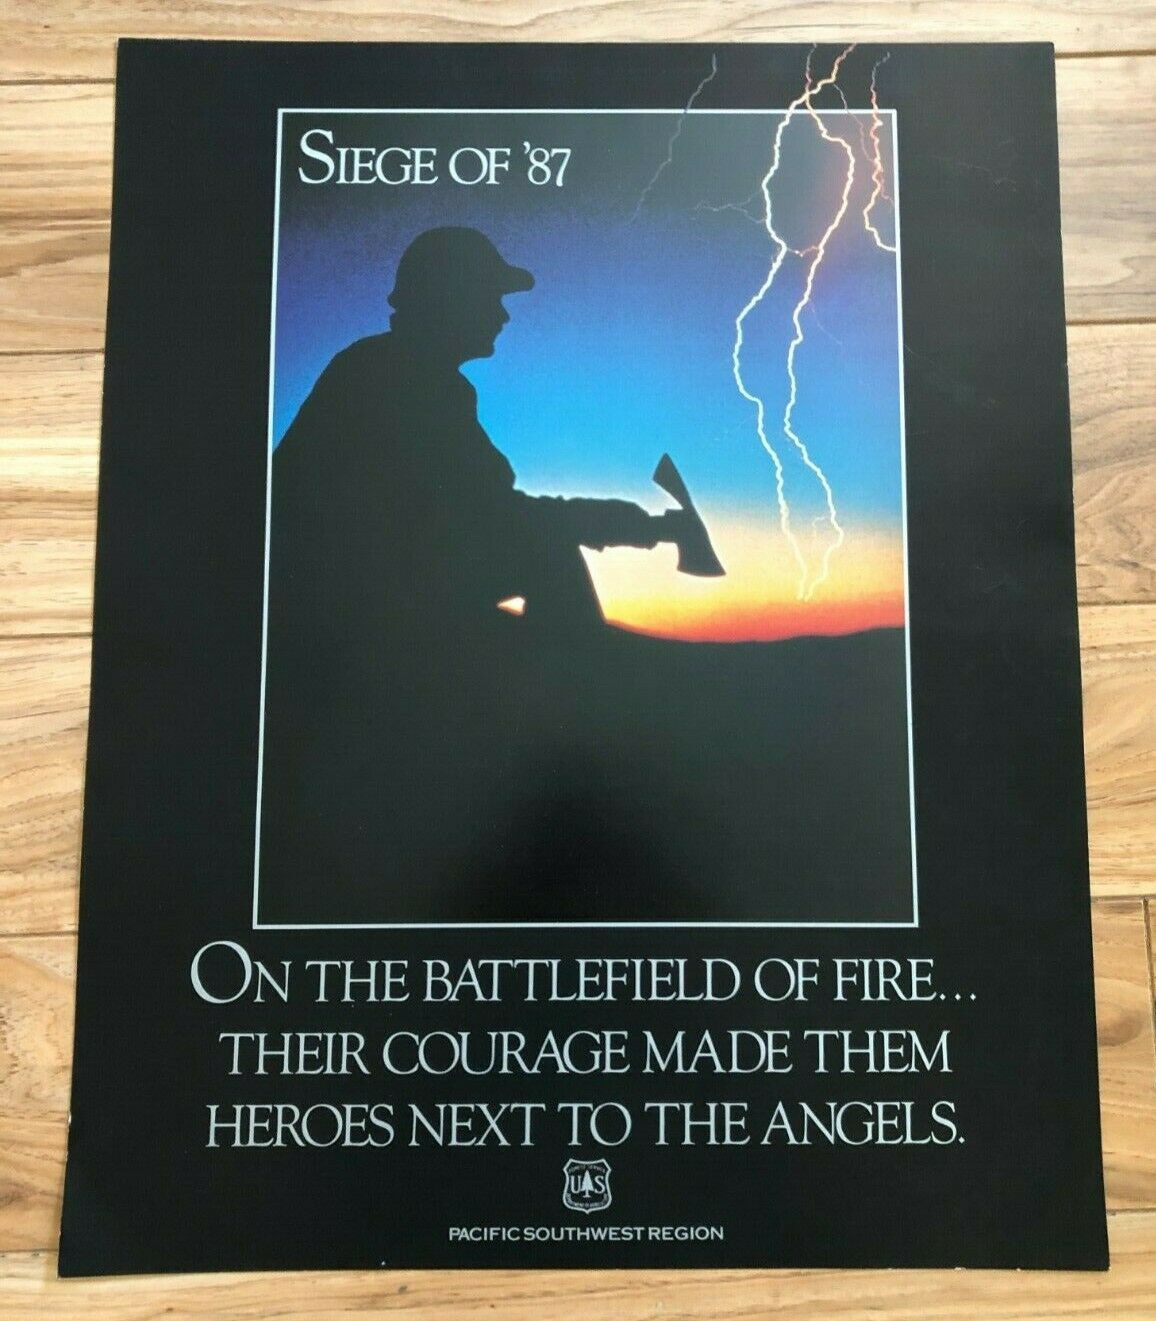 Usfs R5 Siege Of '87 Tribute To Wildland Firefighters Poster Excellent Condition